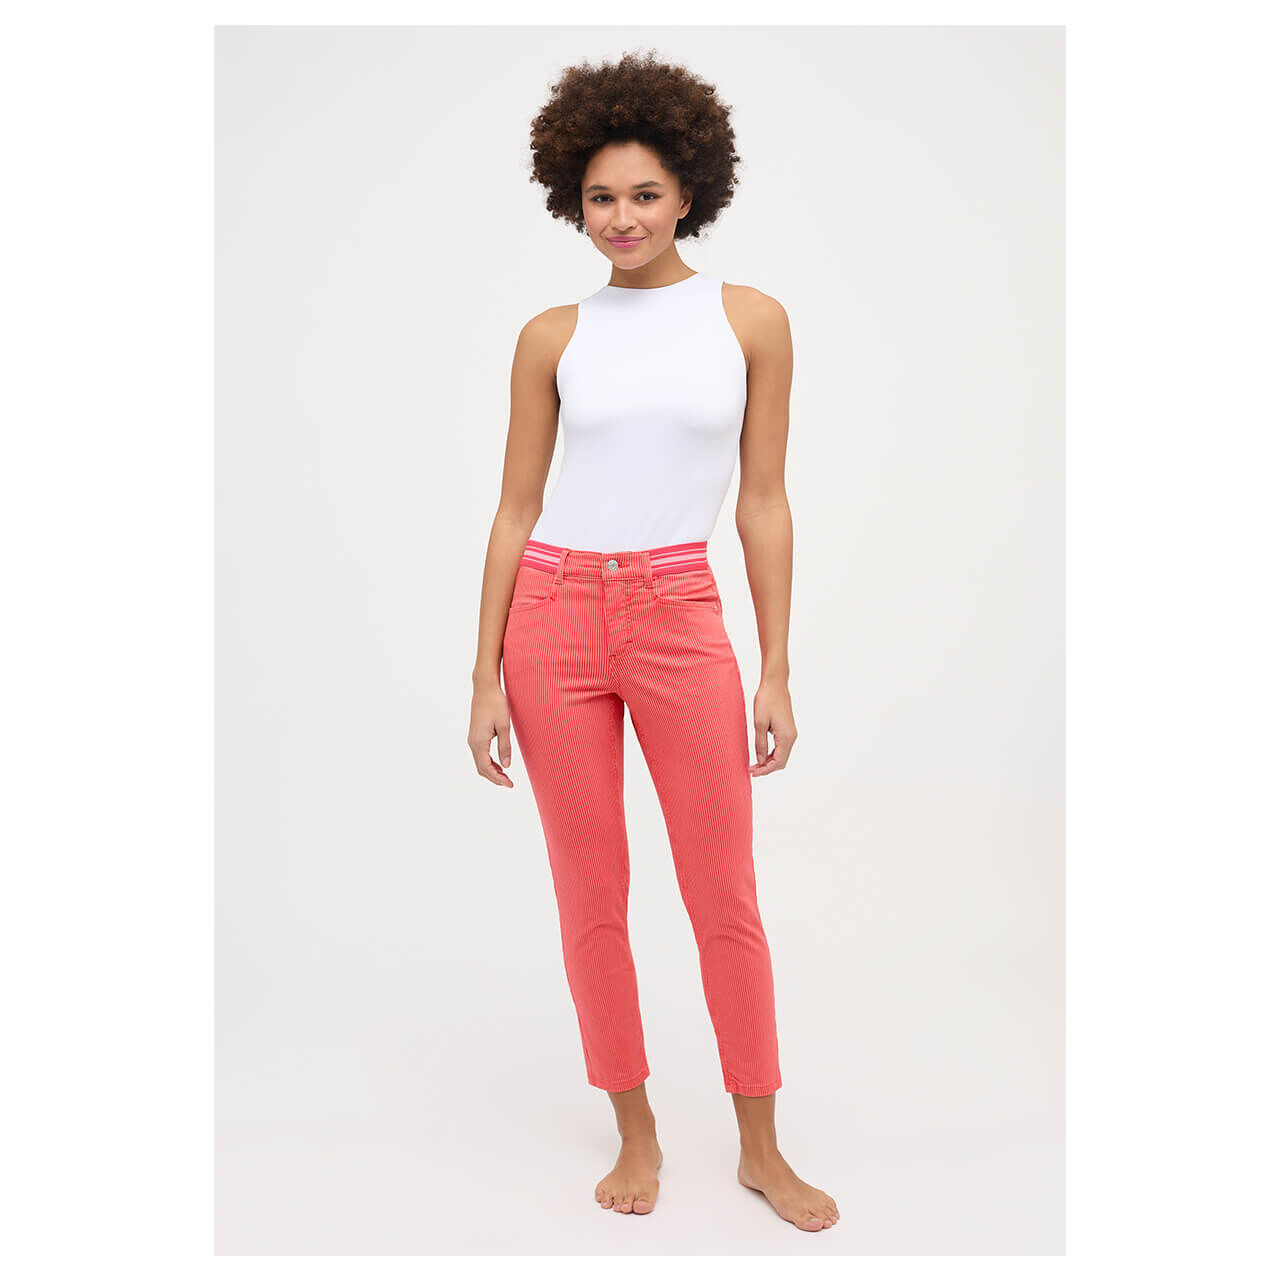 Angels Ornella Sporty 7/8 Jeans aperol used